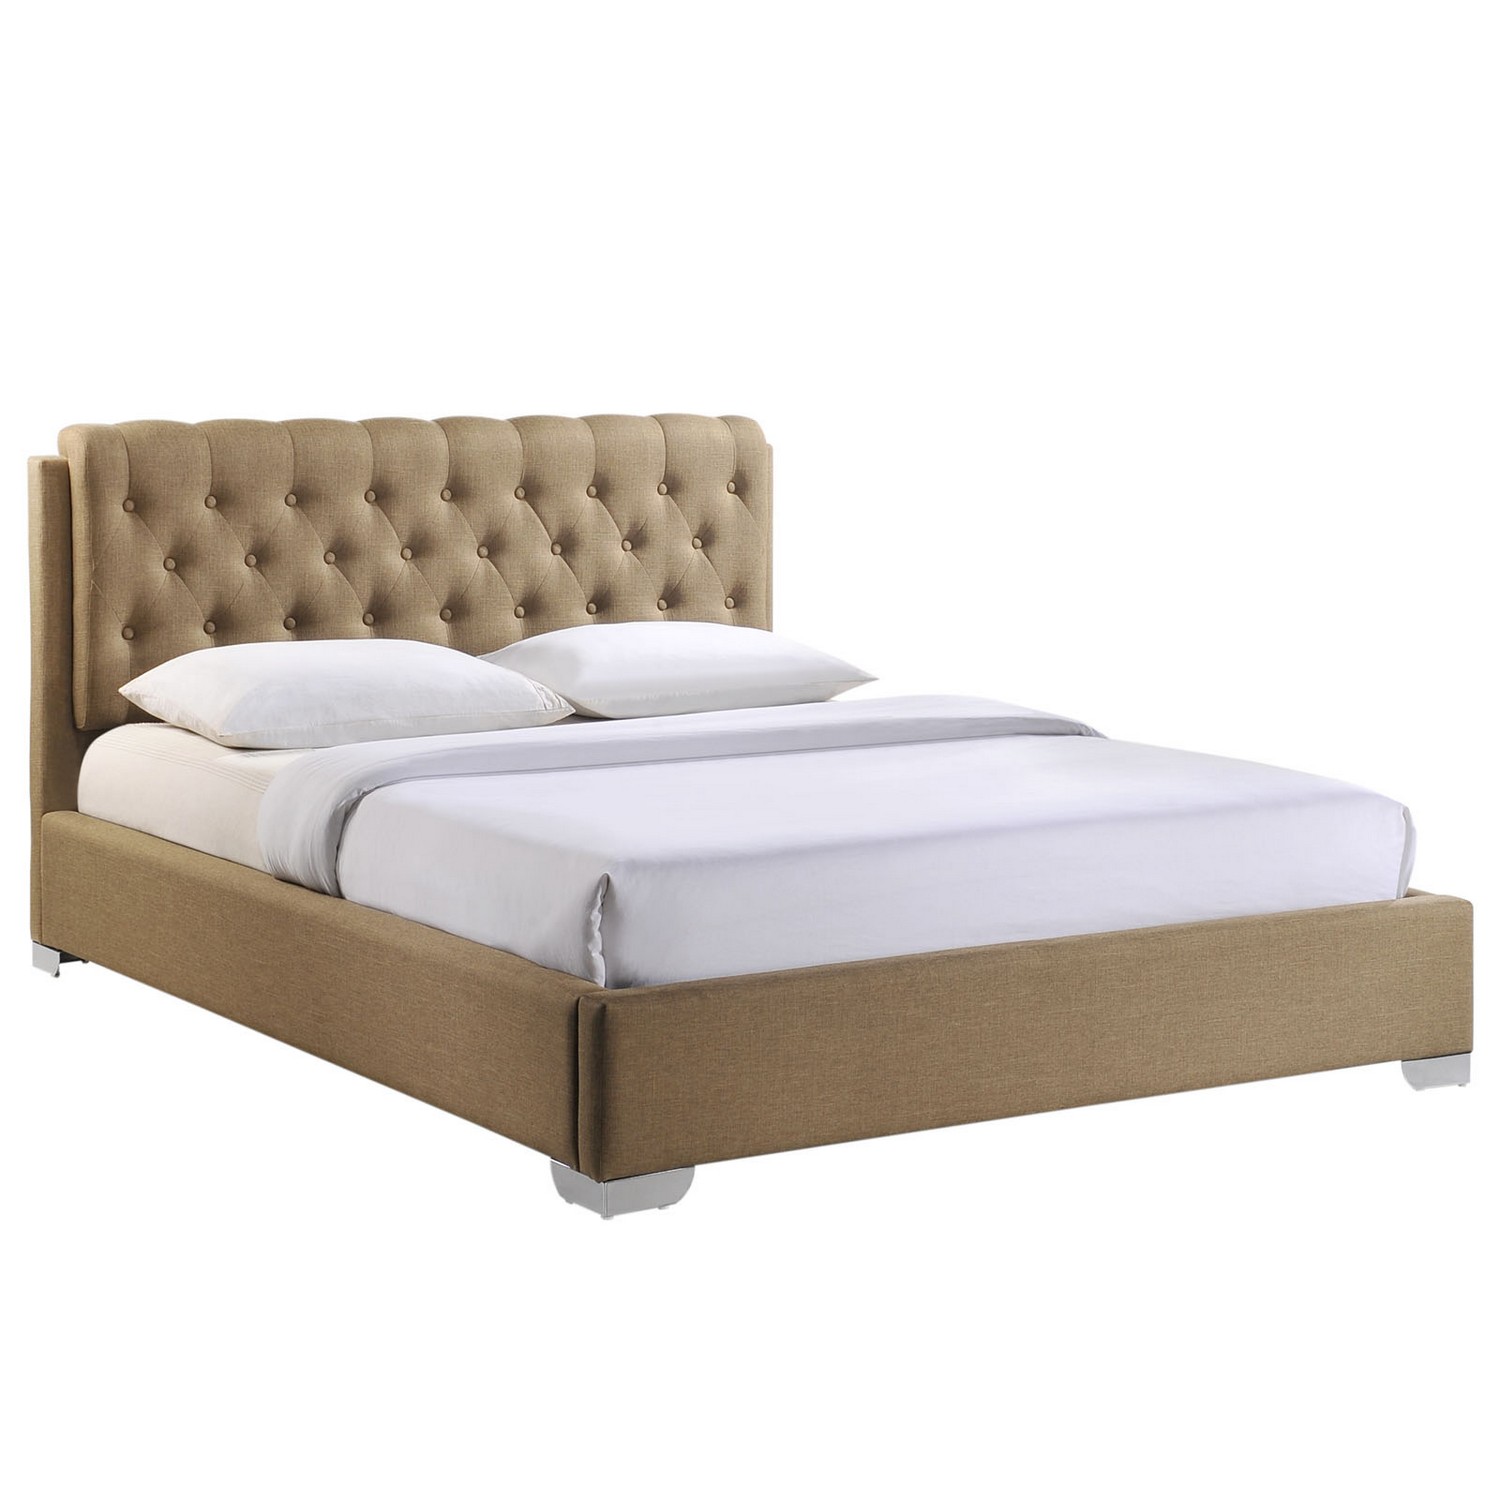 Modway Amelia Queen Fabric Bed - Latte